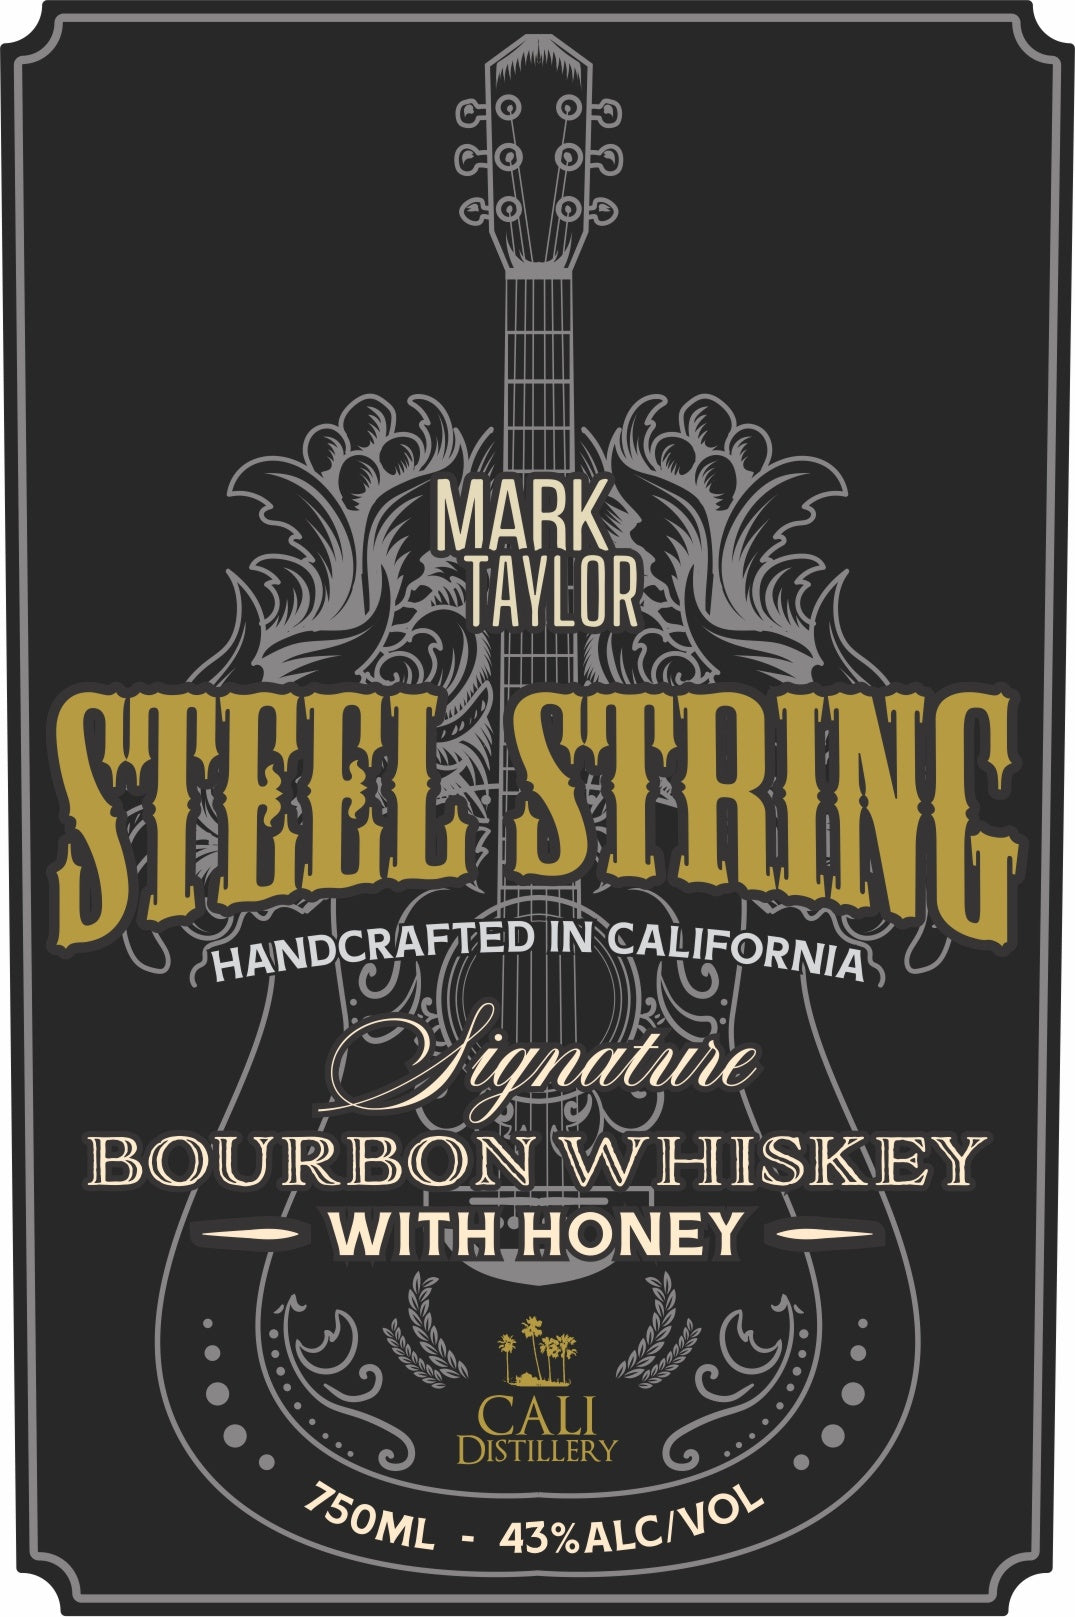 Steel String Bourbon Whiskey with Honey Alcoholic Beverages CALI Distillery   